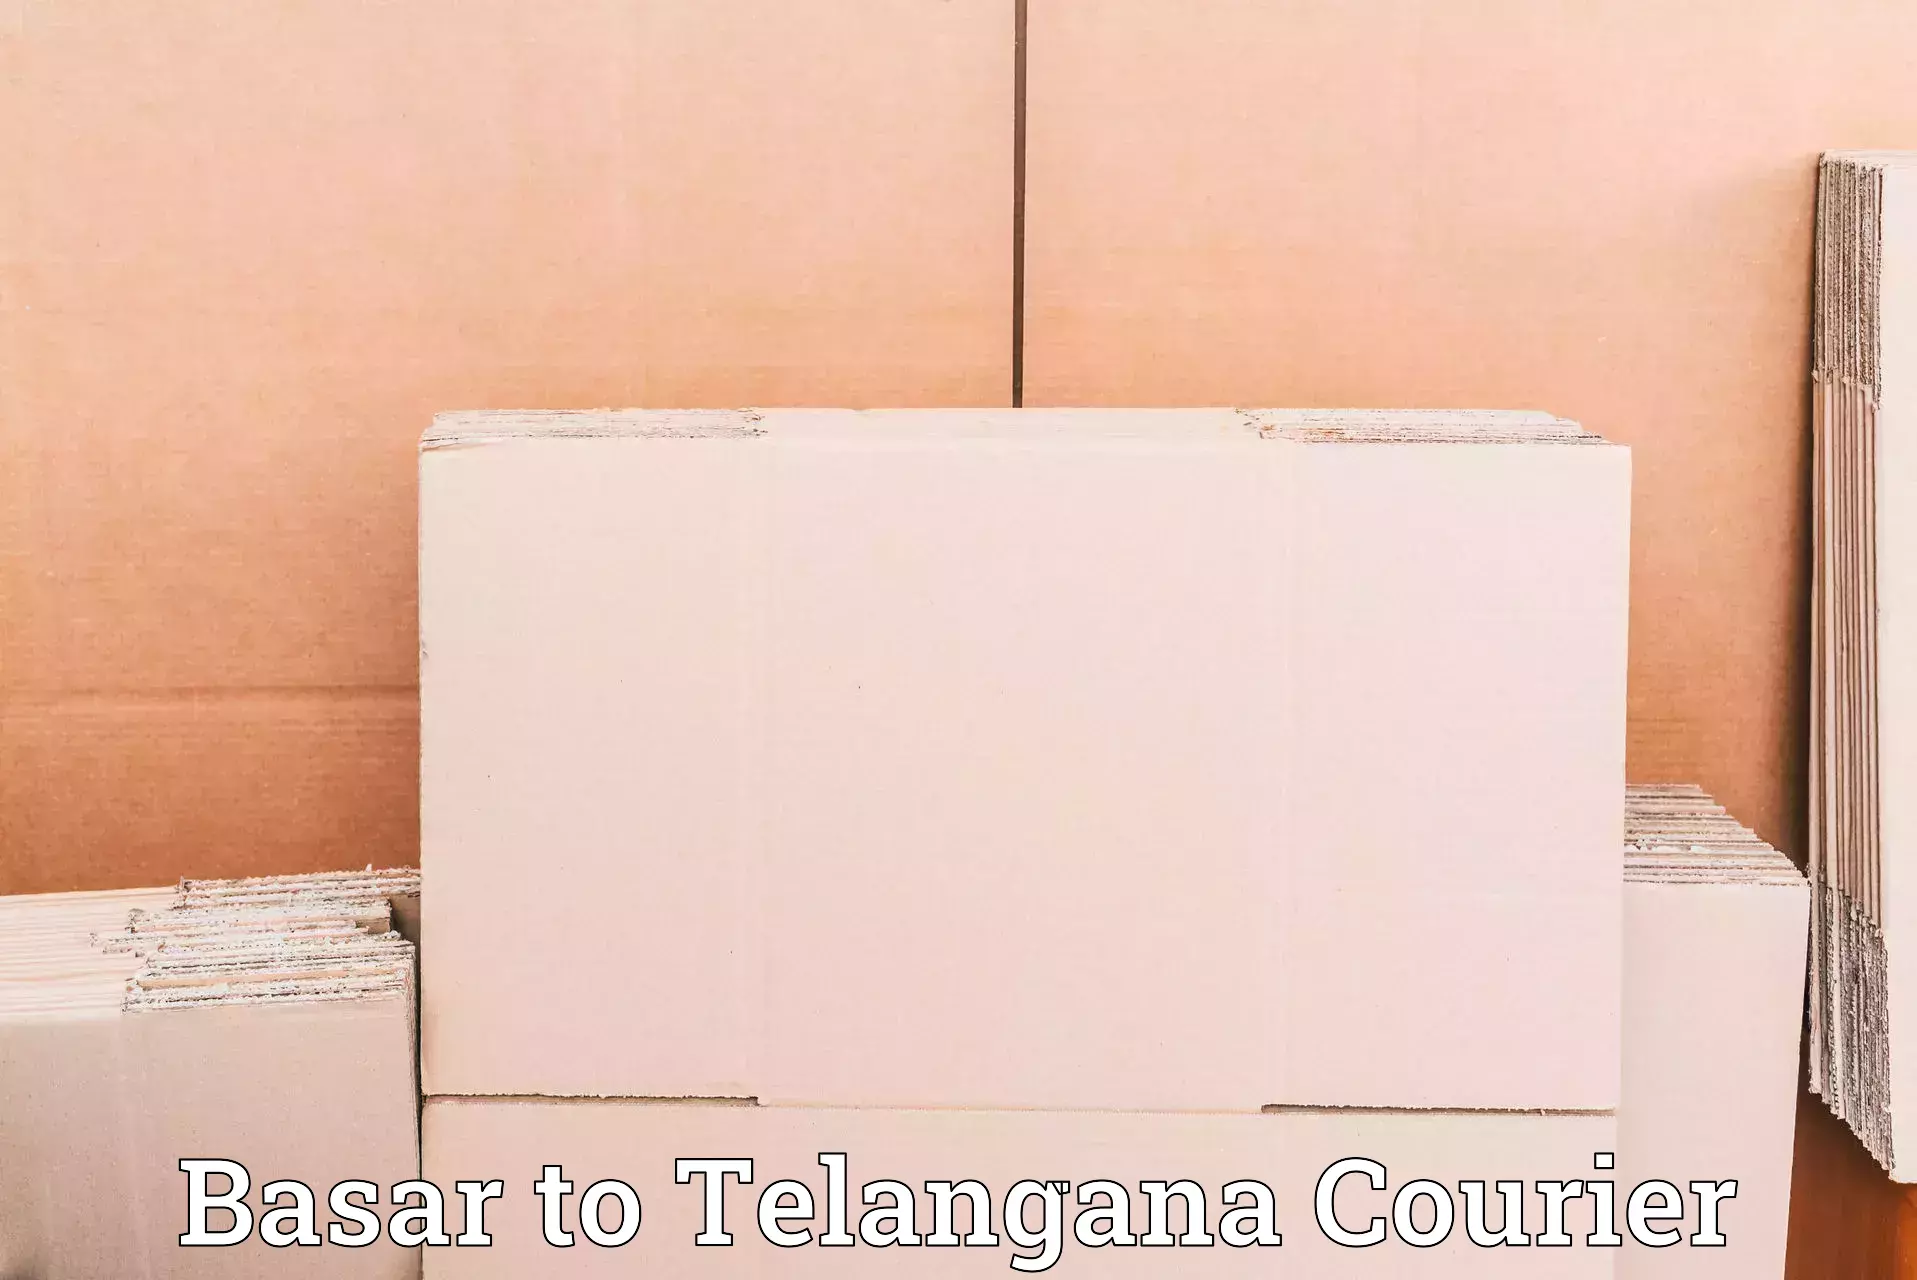 State-of-the-art courier technology Basar to Telangana